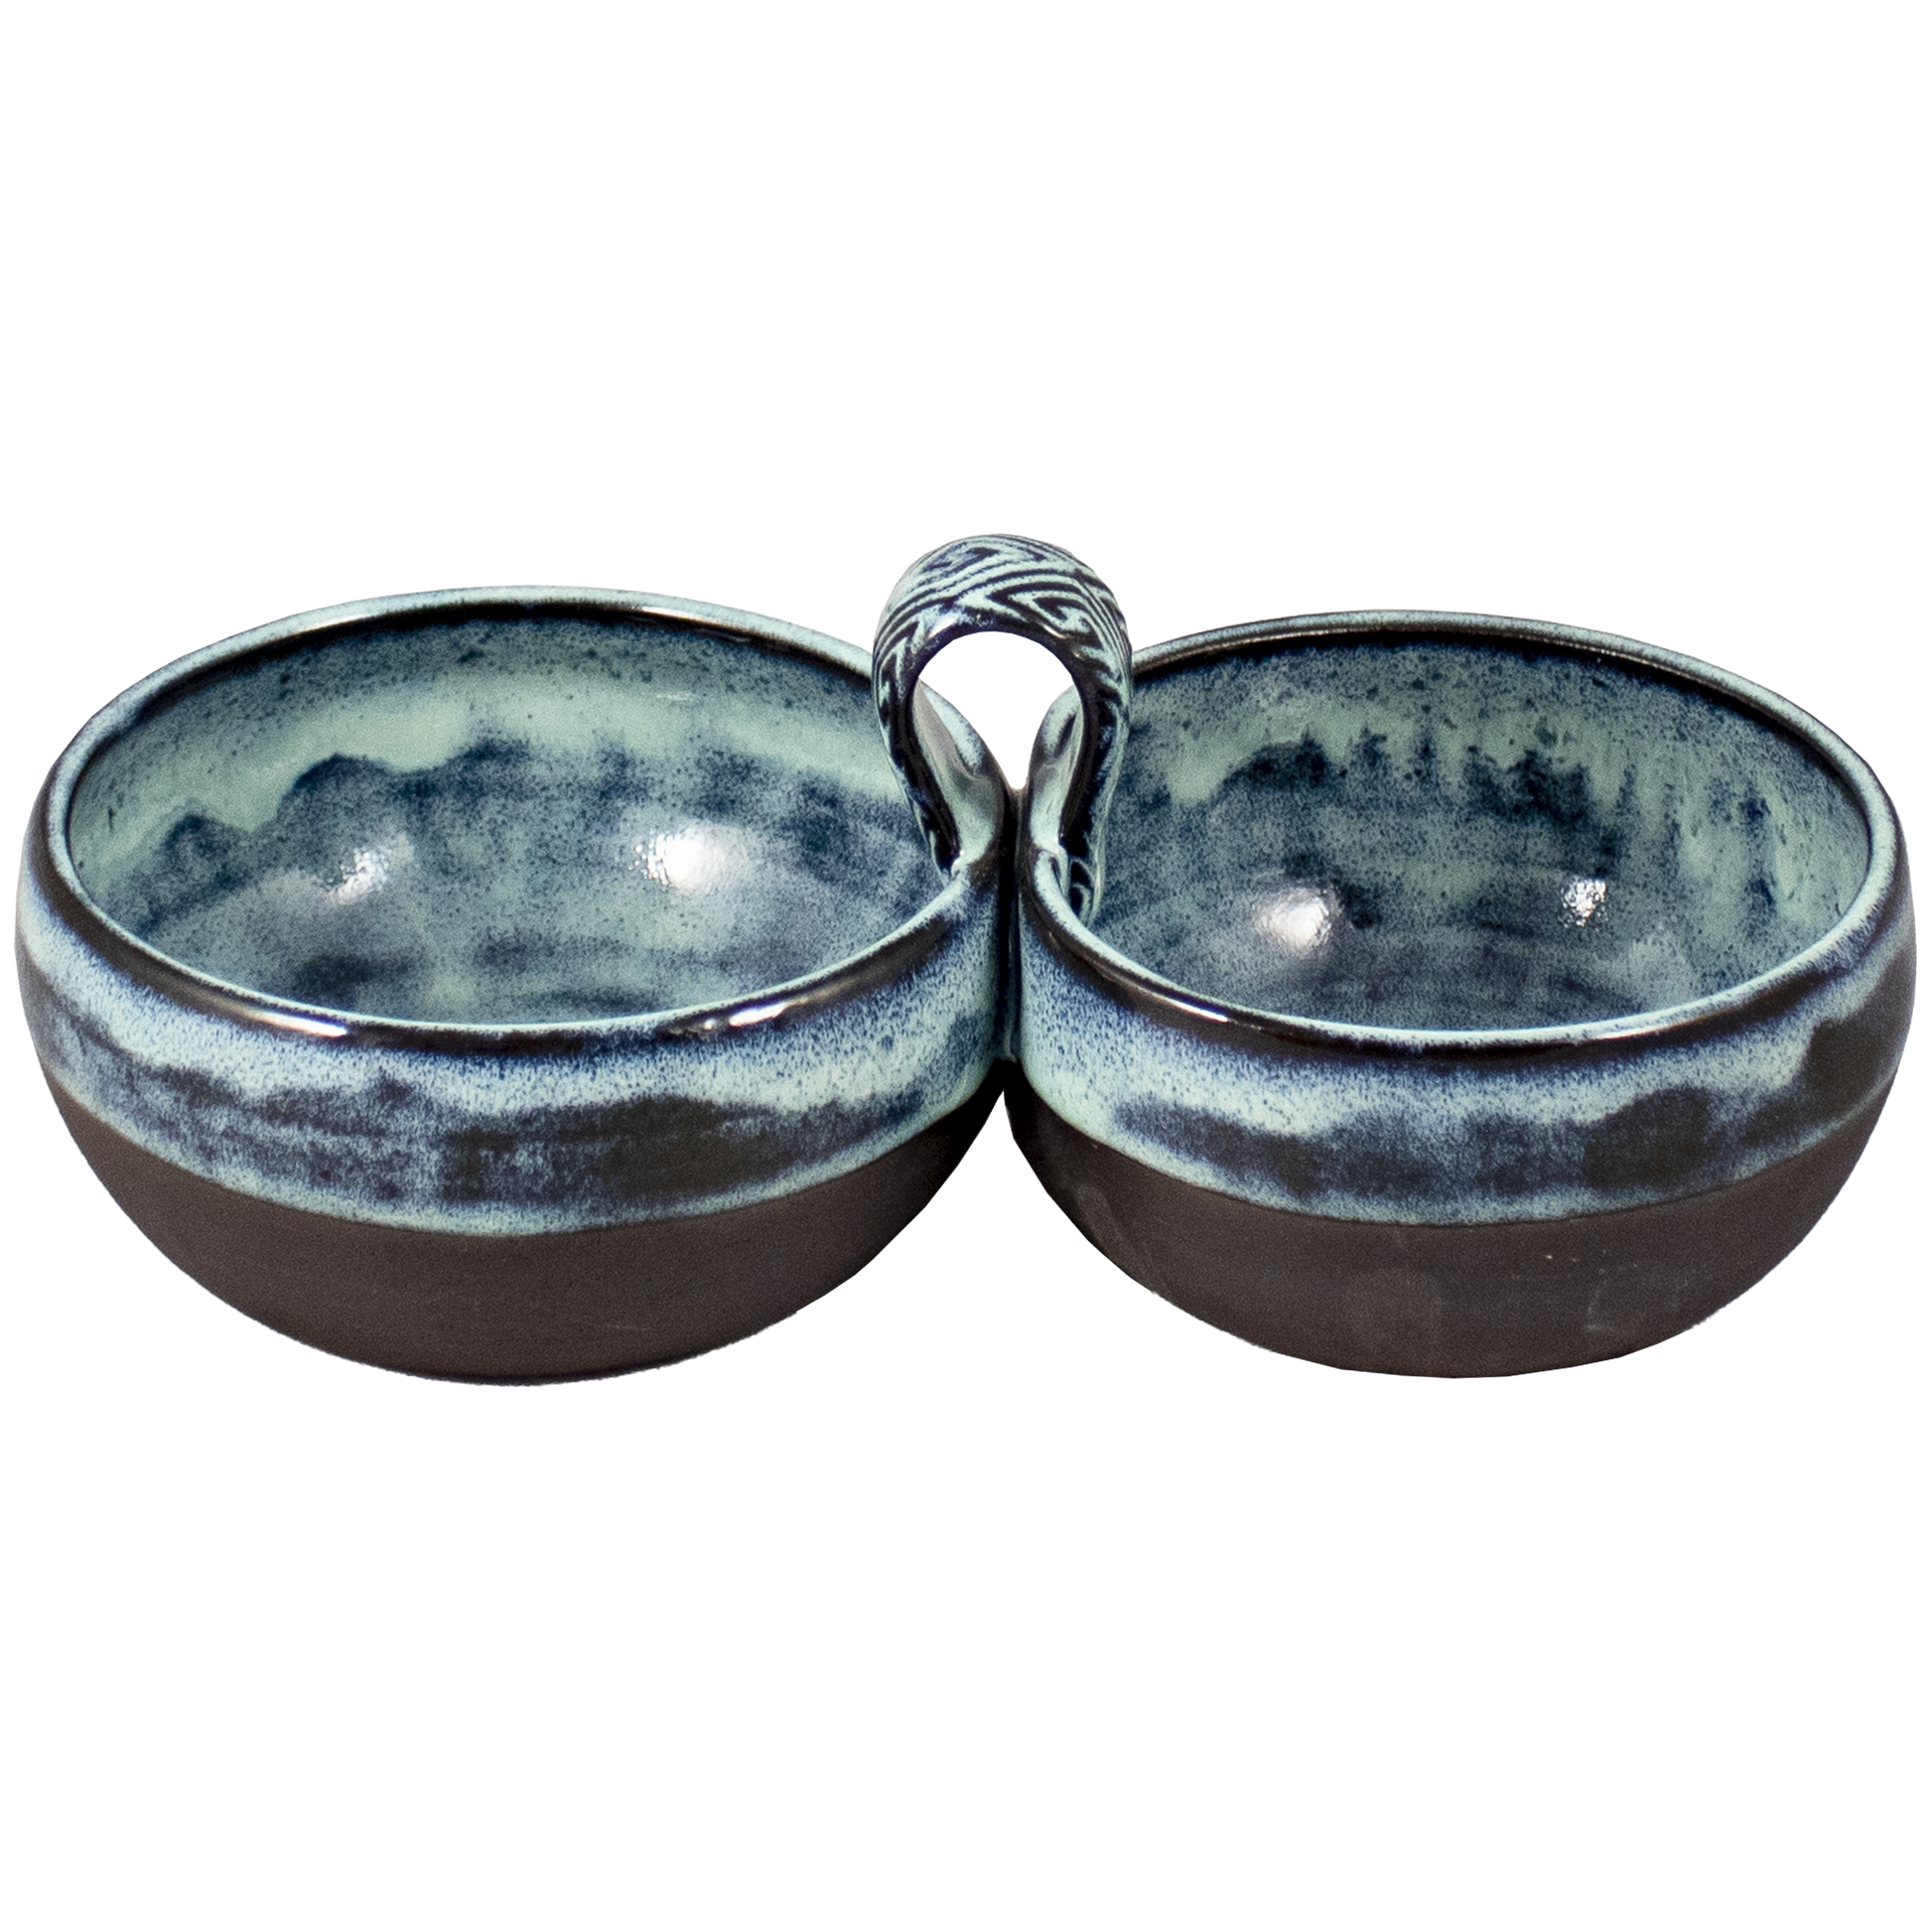 Two blue glazed ceramic bowls with a middle handle great for chips and dip